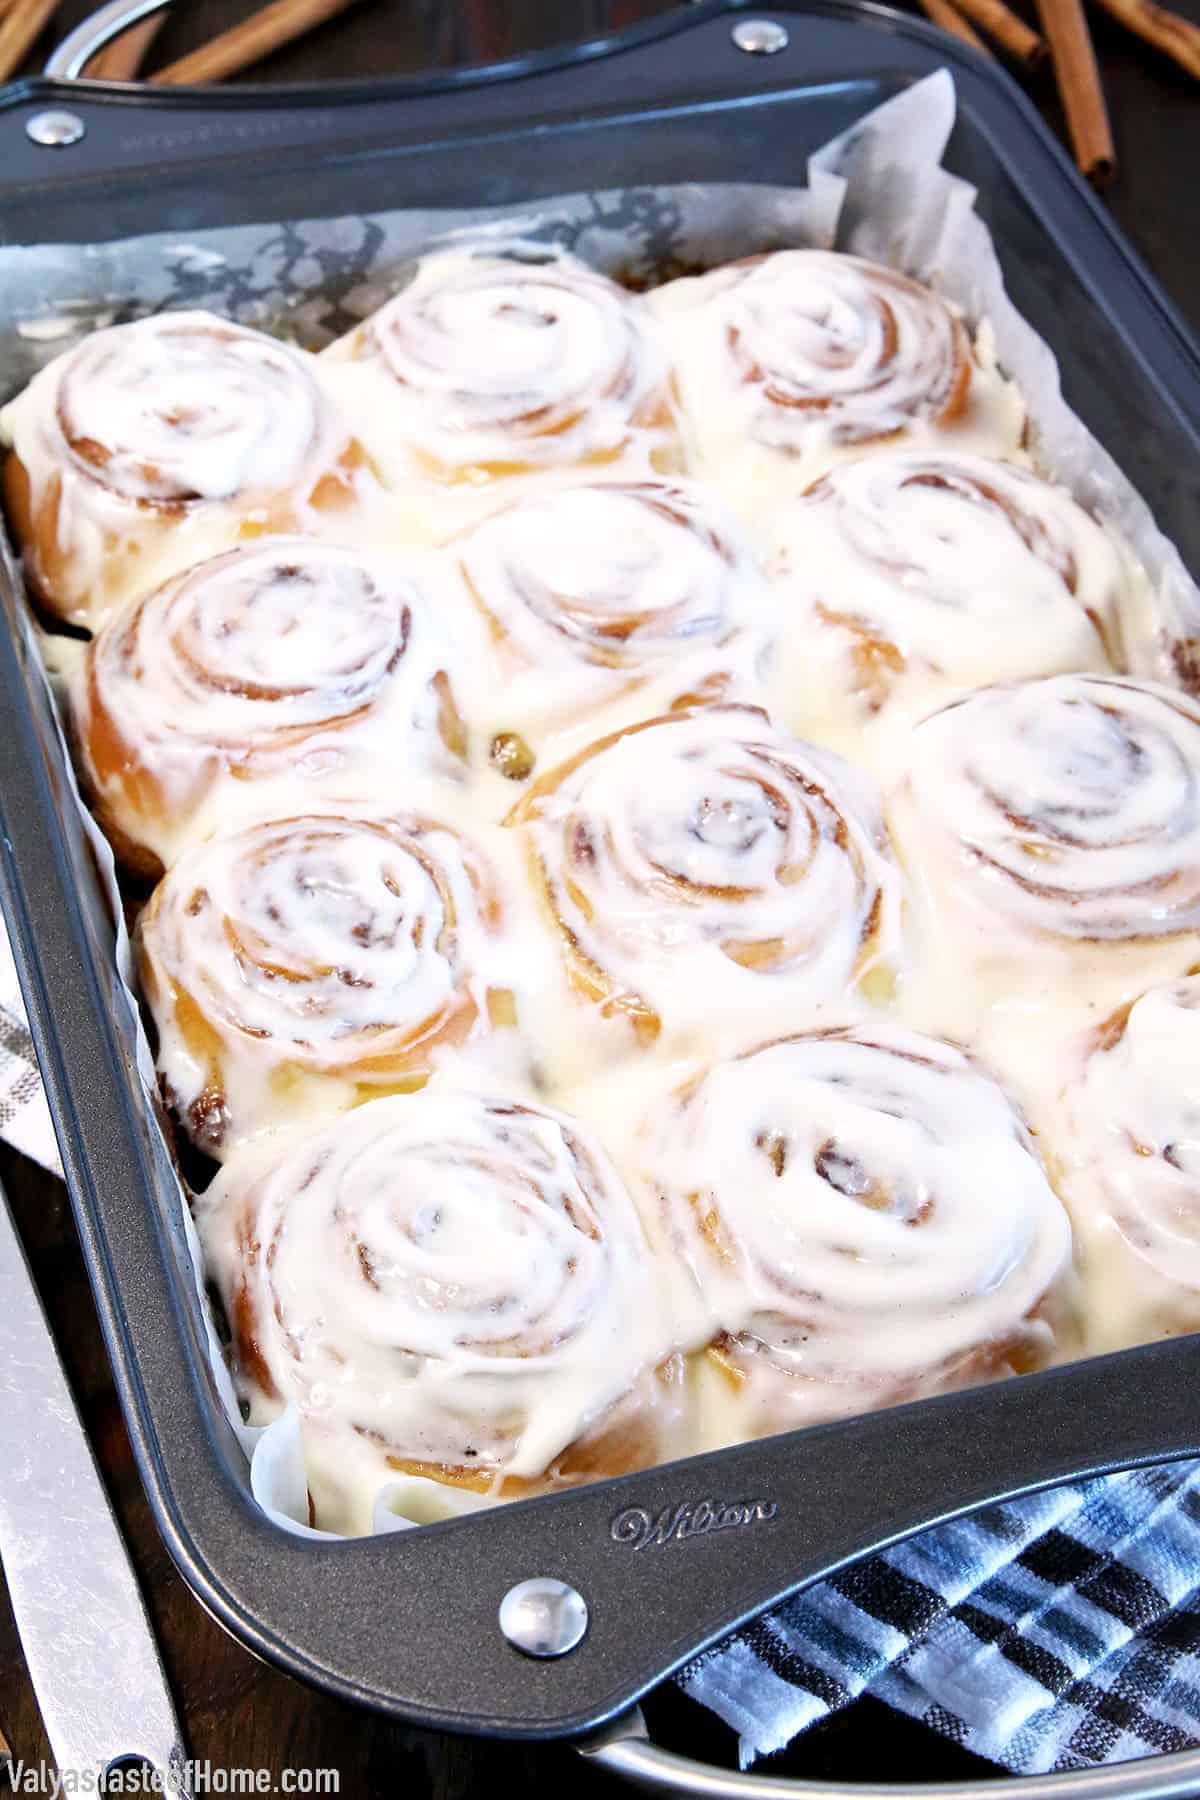 Super Soft Cinnamon Rolls This is a list of the Top 12 Most Popular Recipes of 2021 according to google analytics. It always has been fun to see which recipes were the most popular of the year.